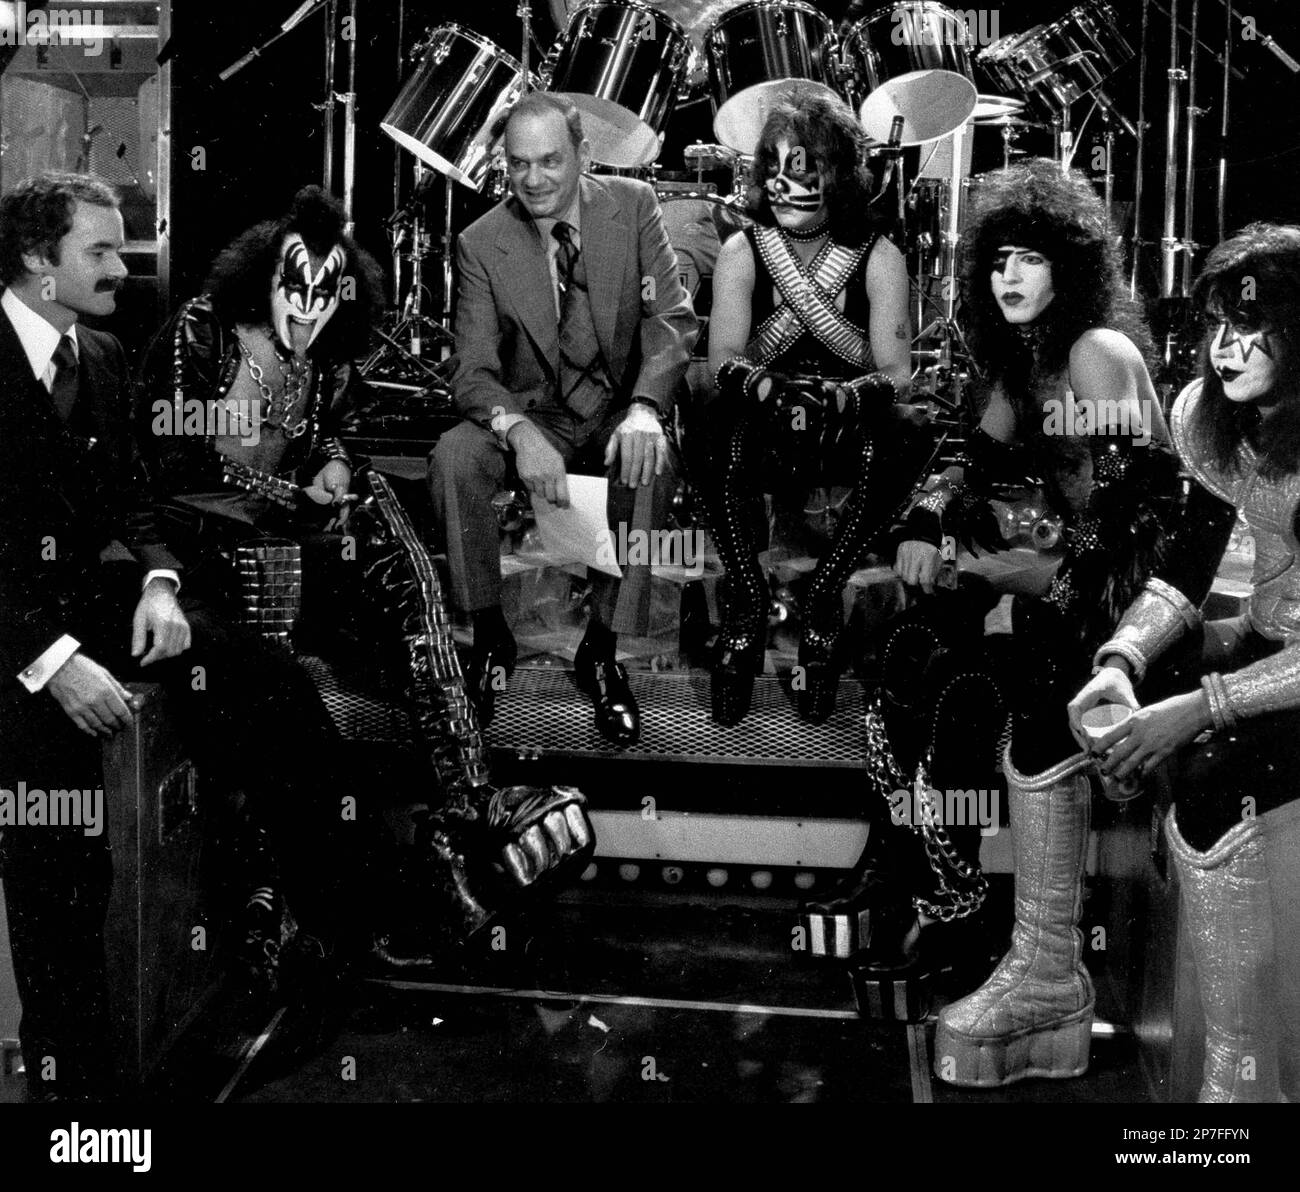 https://c8.alamy.com/comp/2P7FFYN/file-in-this-dec-16-1977-file-photo-nbc-news-correspondent-edwin-newman-third-left-is-surrounded-by-the-rock-group-kiss-from-second-left-gene-simmons-peter-criss-paul-stanley-and-ace-frehley-and-their-manager-bill-aucoin-left-in-new-york-aucoin-who-discovered-the-rock-group-kiss-and-helped-build-them-into-a-musical-and-merchandising-juggernaut-died-of-complications-from-prostate-cancer-on-monday-june-28-2010-in-aventura-fla-he-was-66-ap-photo-file-2P7FFYN.jpg